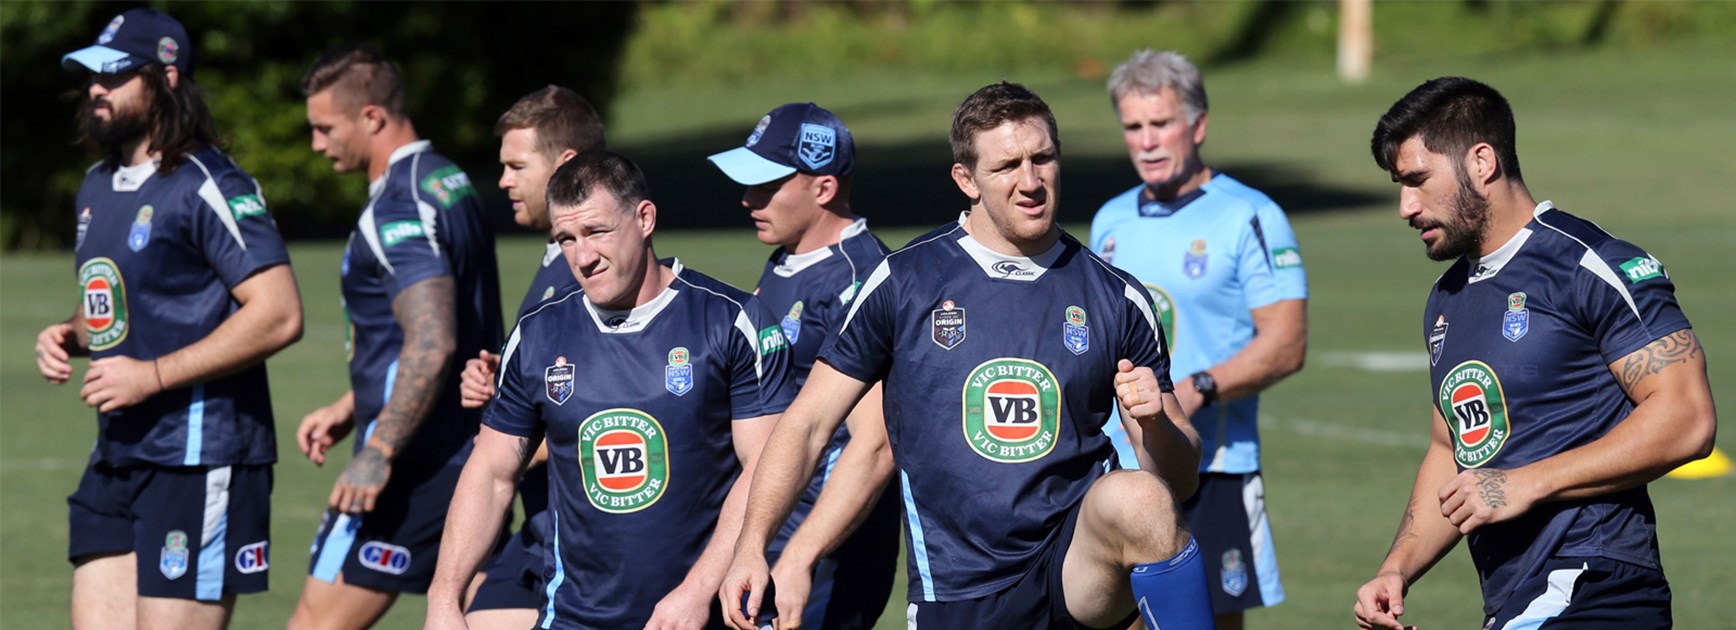 The NSW Blues kick off their training camp ahead of State of Origin III.